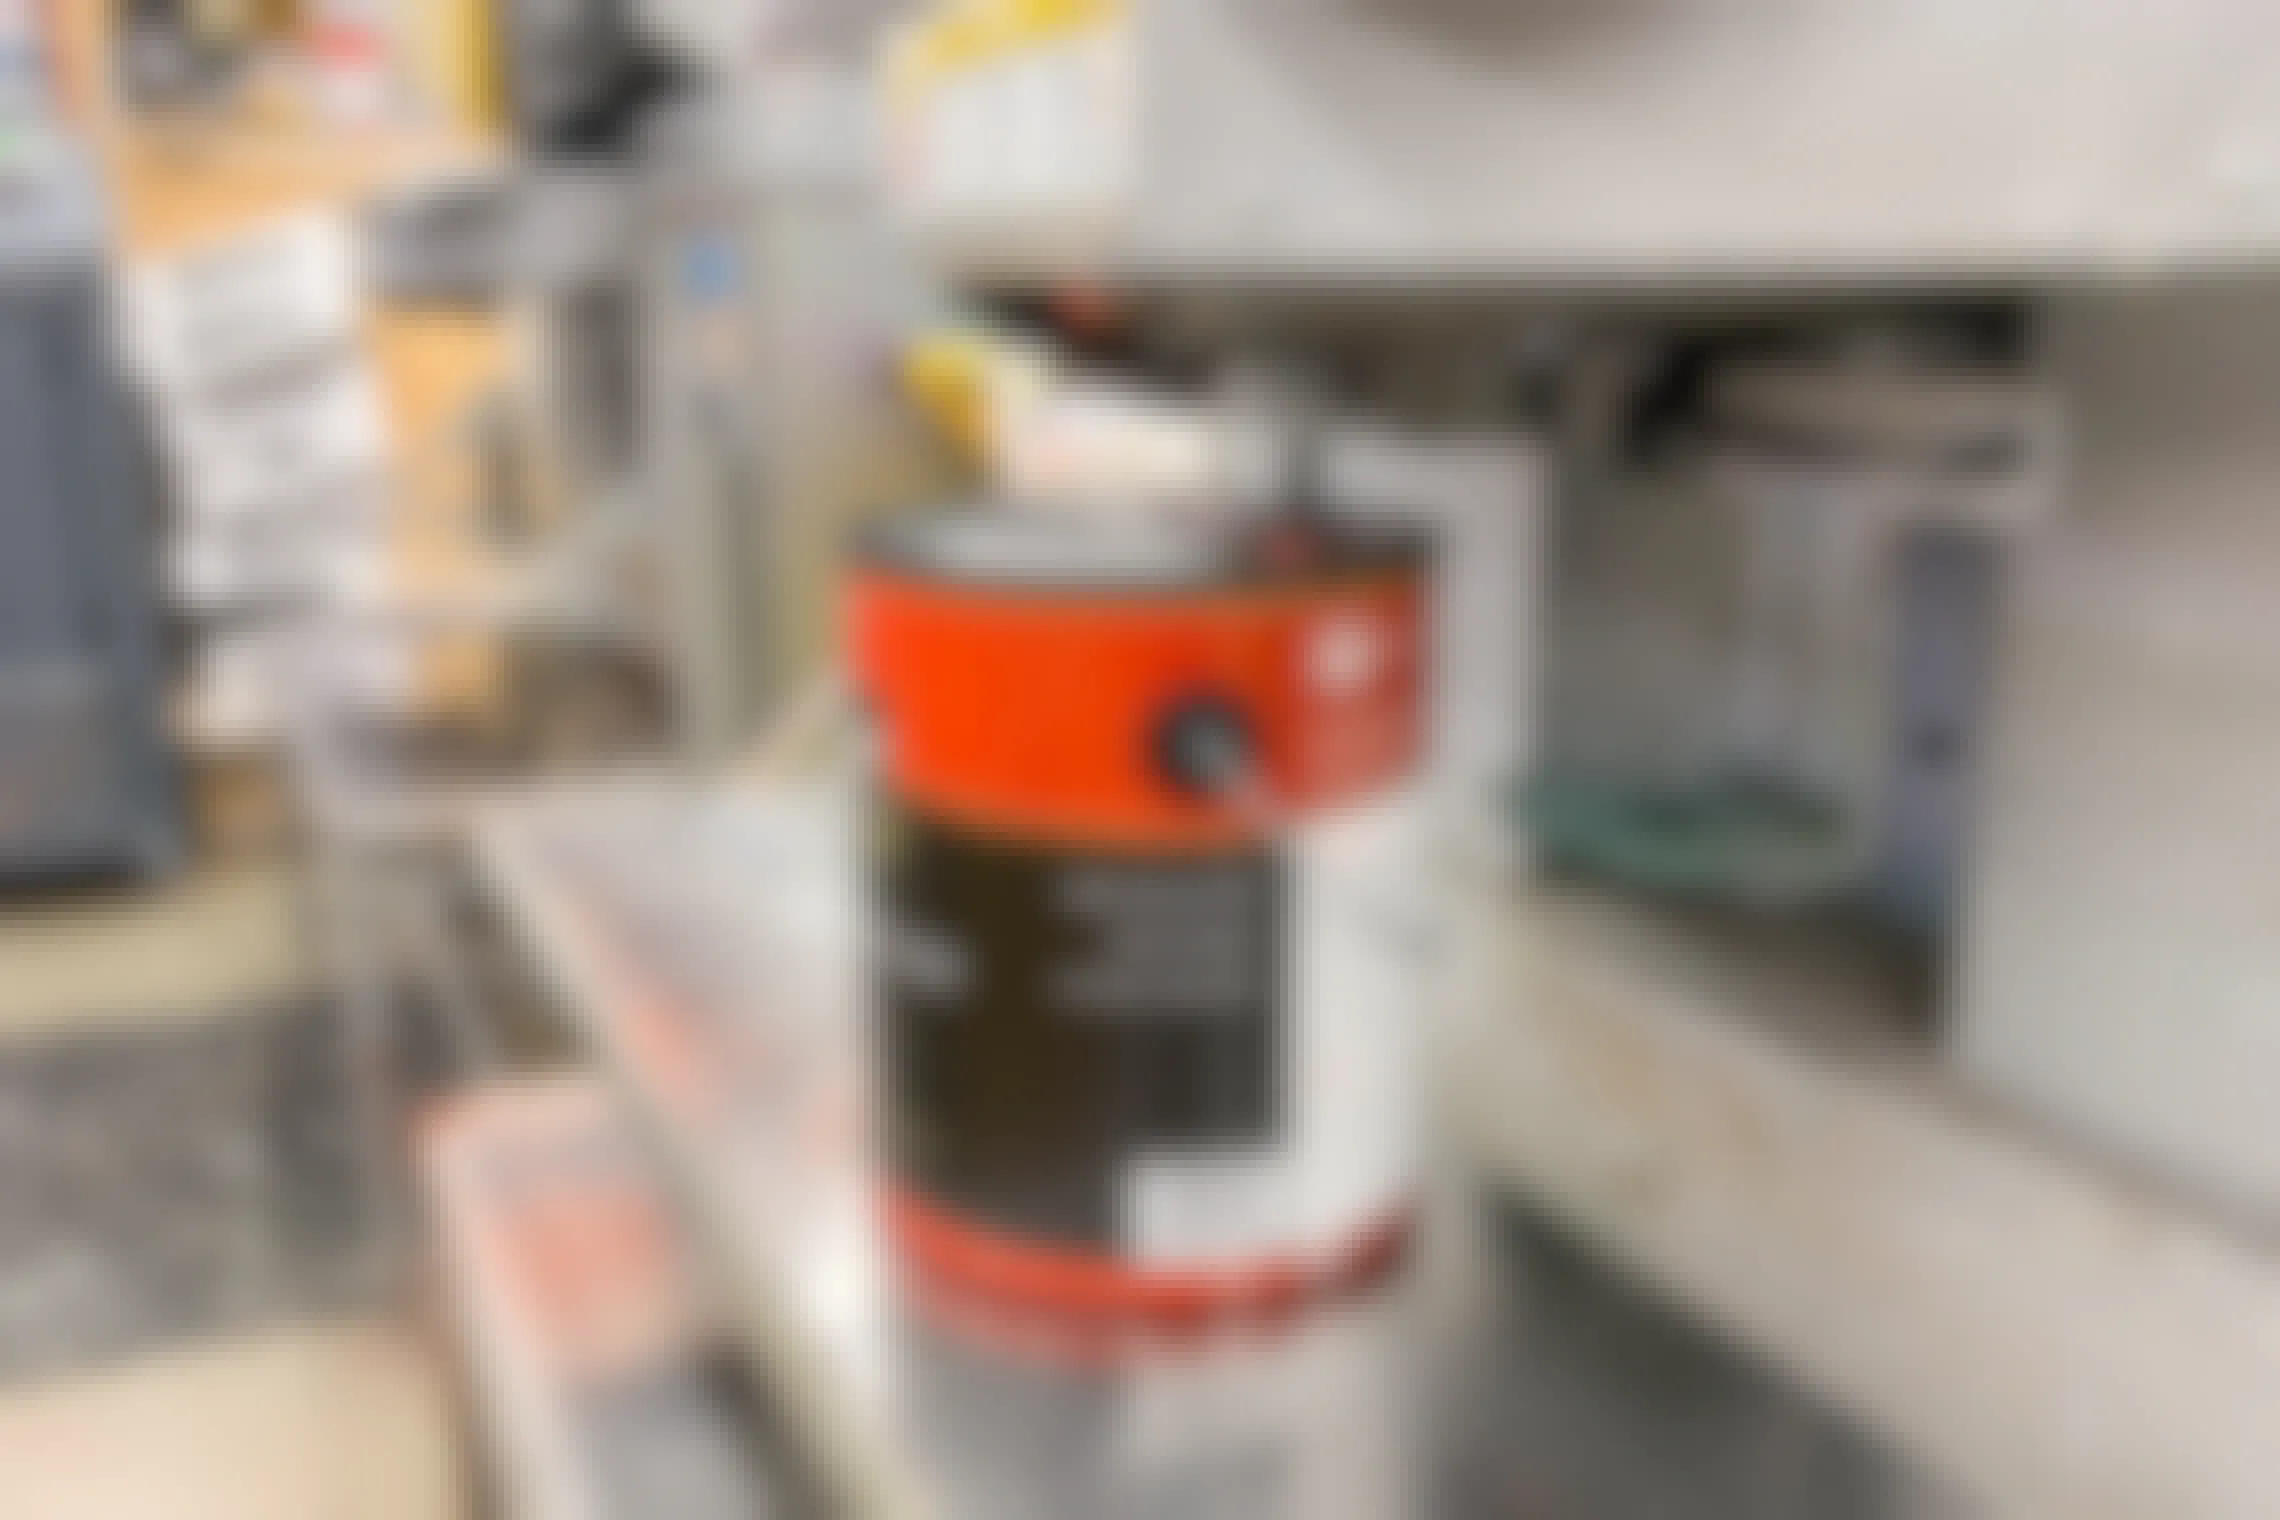 An open can of paint sitting below the machine used for tinting paint.